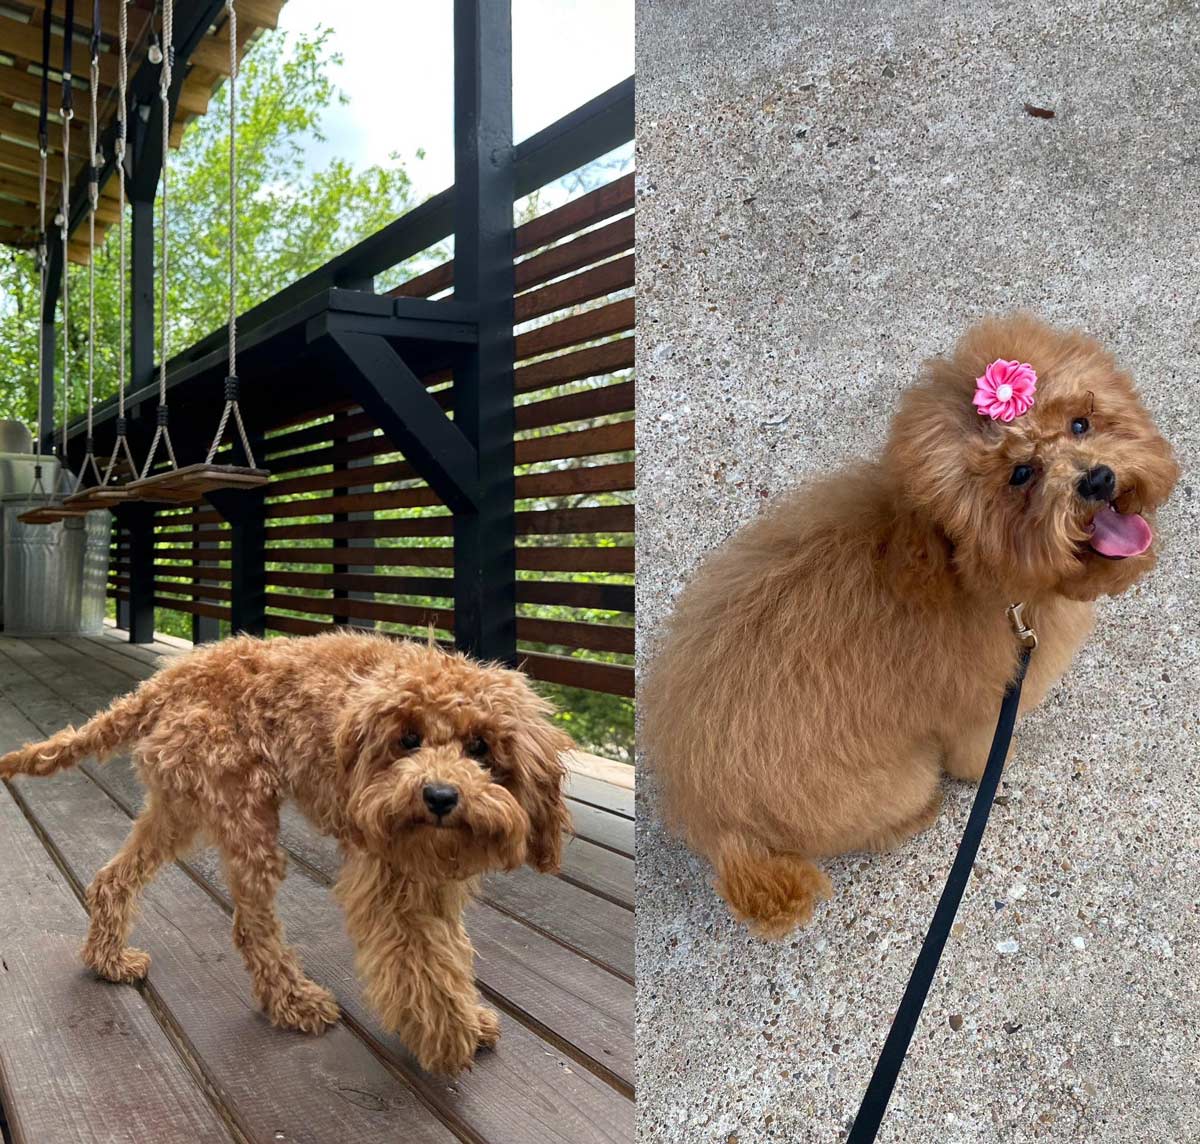 Cool stuff wife tried to save money by giving our dog a haircut on her own. Her haircut vs the professional haircut. No animals were harmed (besides self esteem)